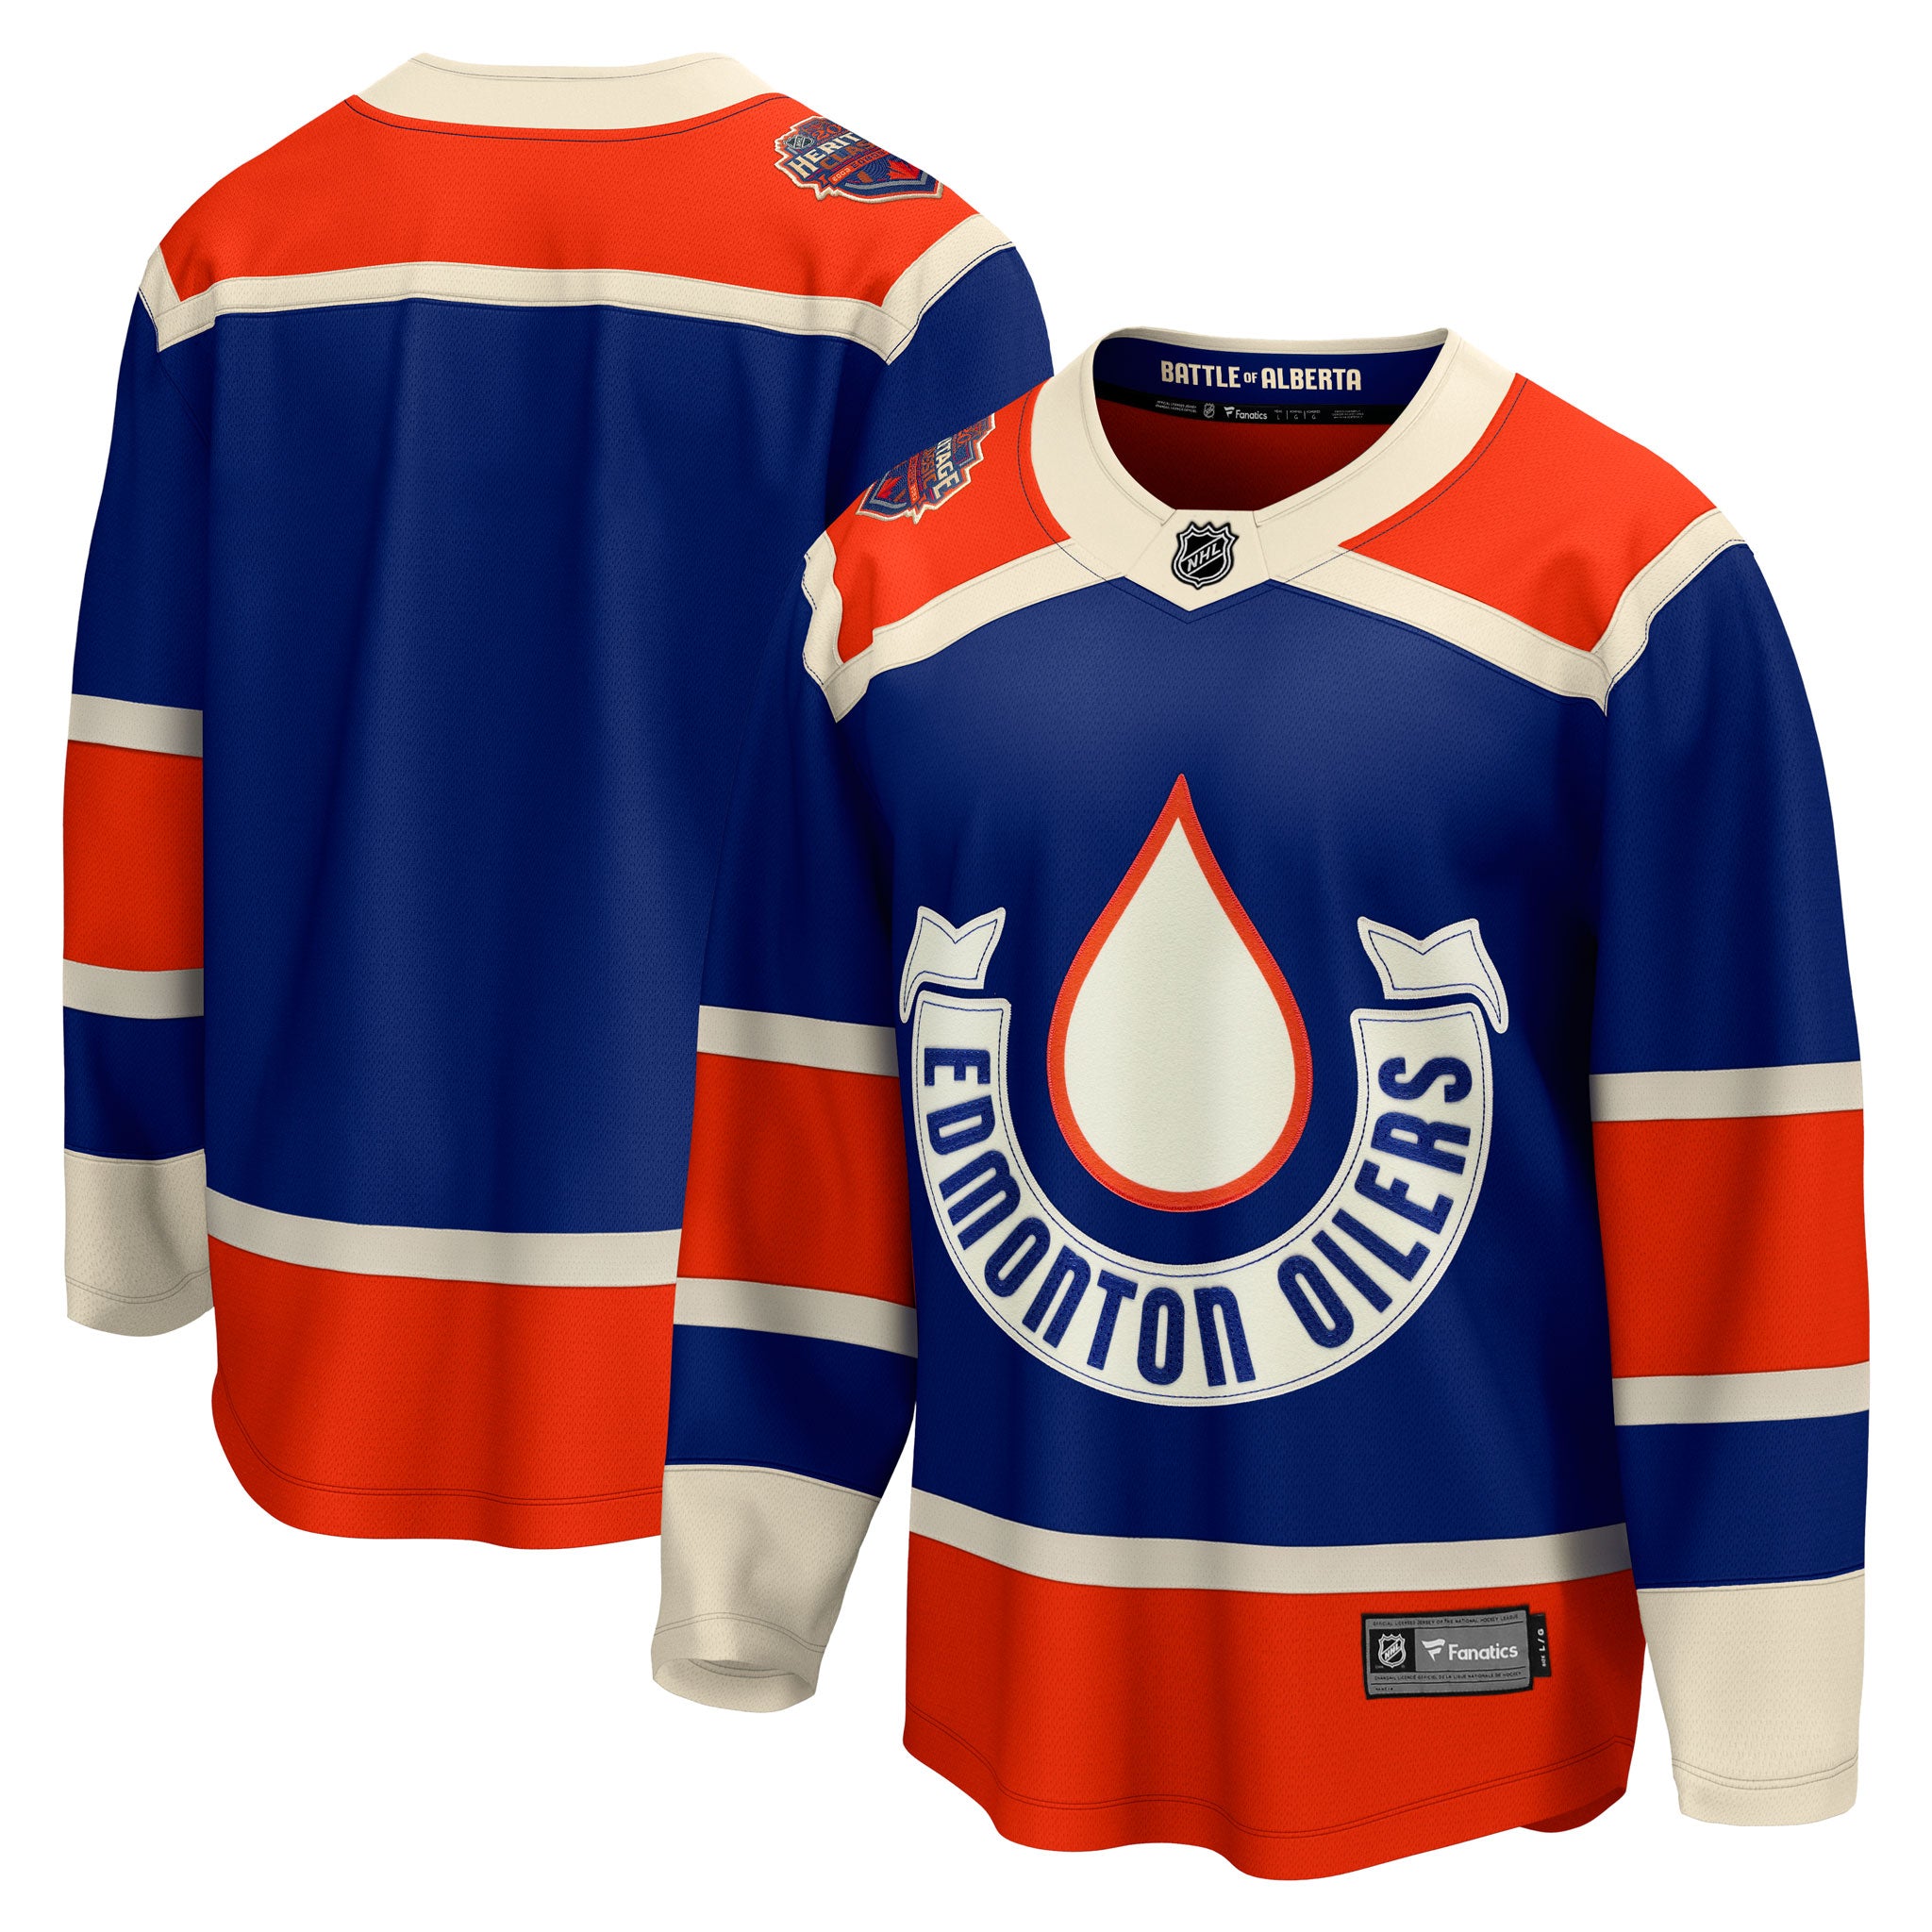 Sabres reveal Heritage Classic jersey